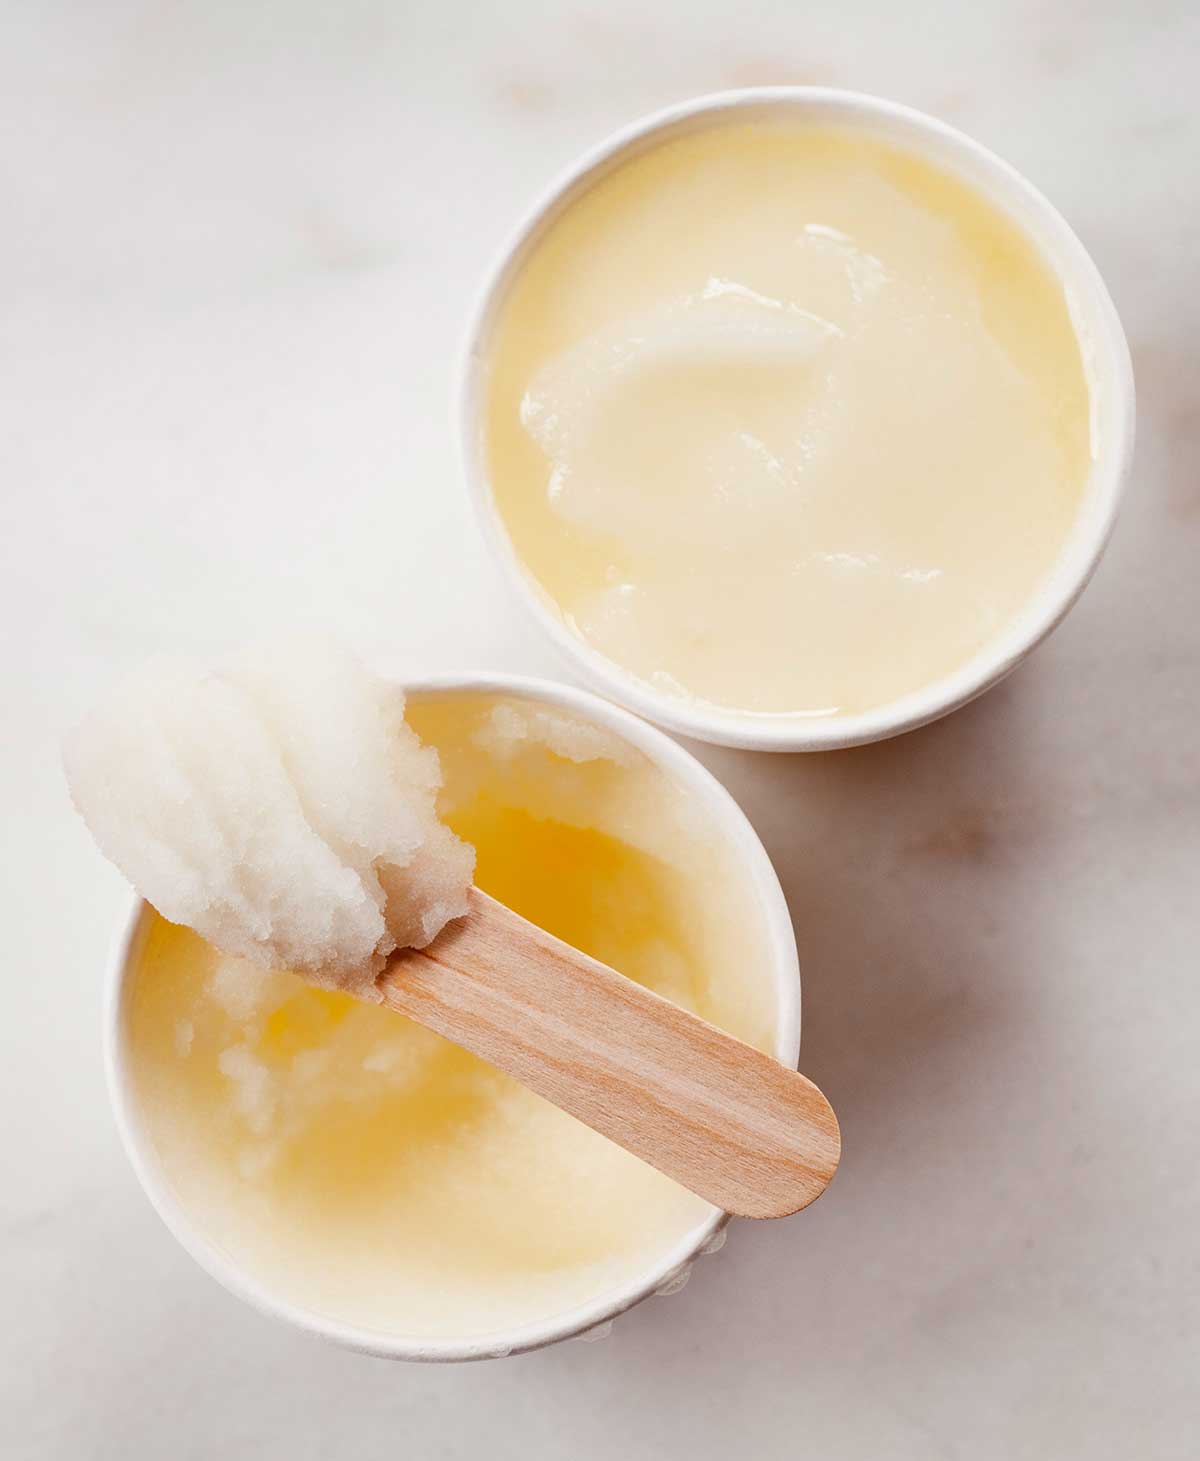 Two small bowls of lemon ice, with a wooden popsicle stick resting on top of one.